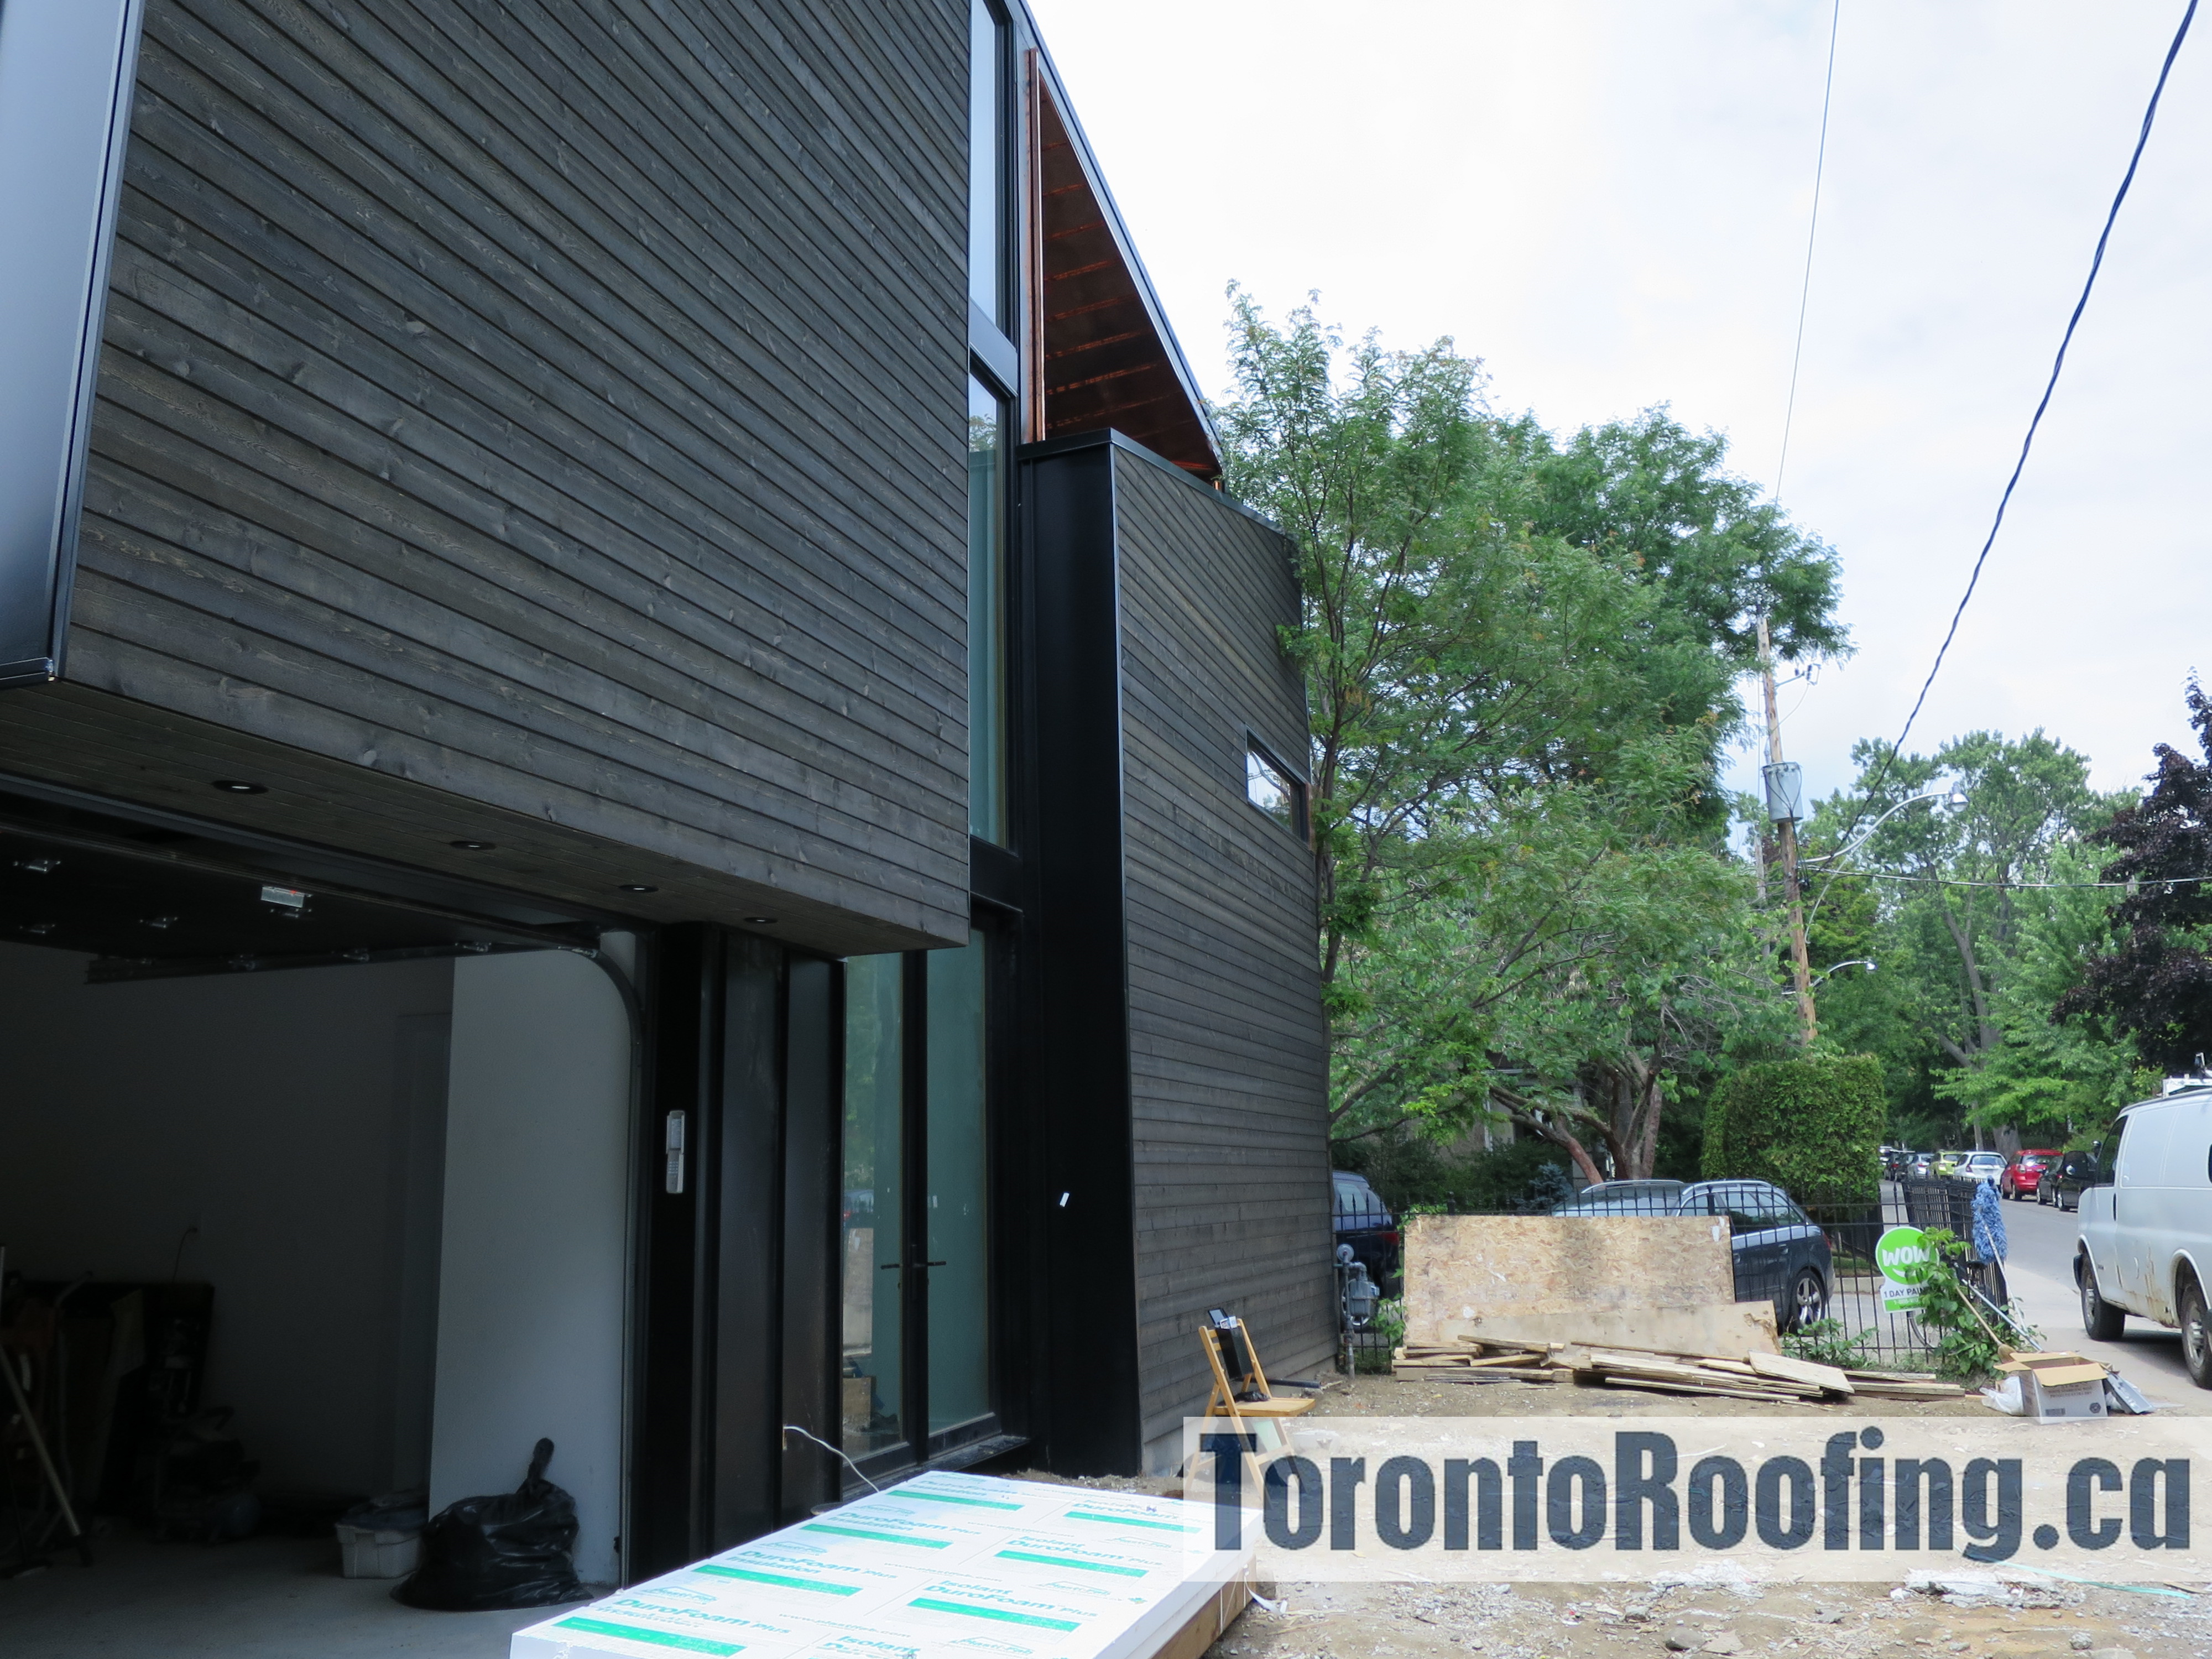 toronto-roofing-roof-siding-metal-copper-wood-modern-homes-aluminum-cladding-architeture-building-contractor-exterior-12